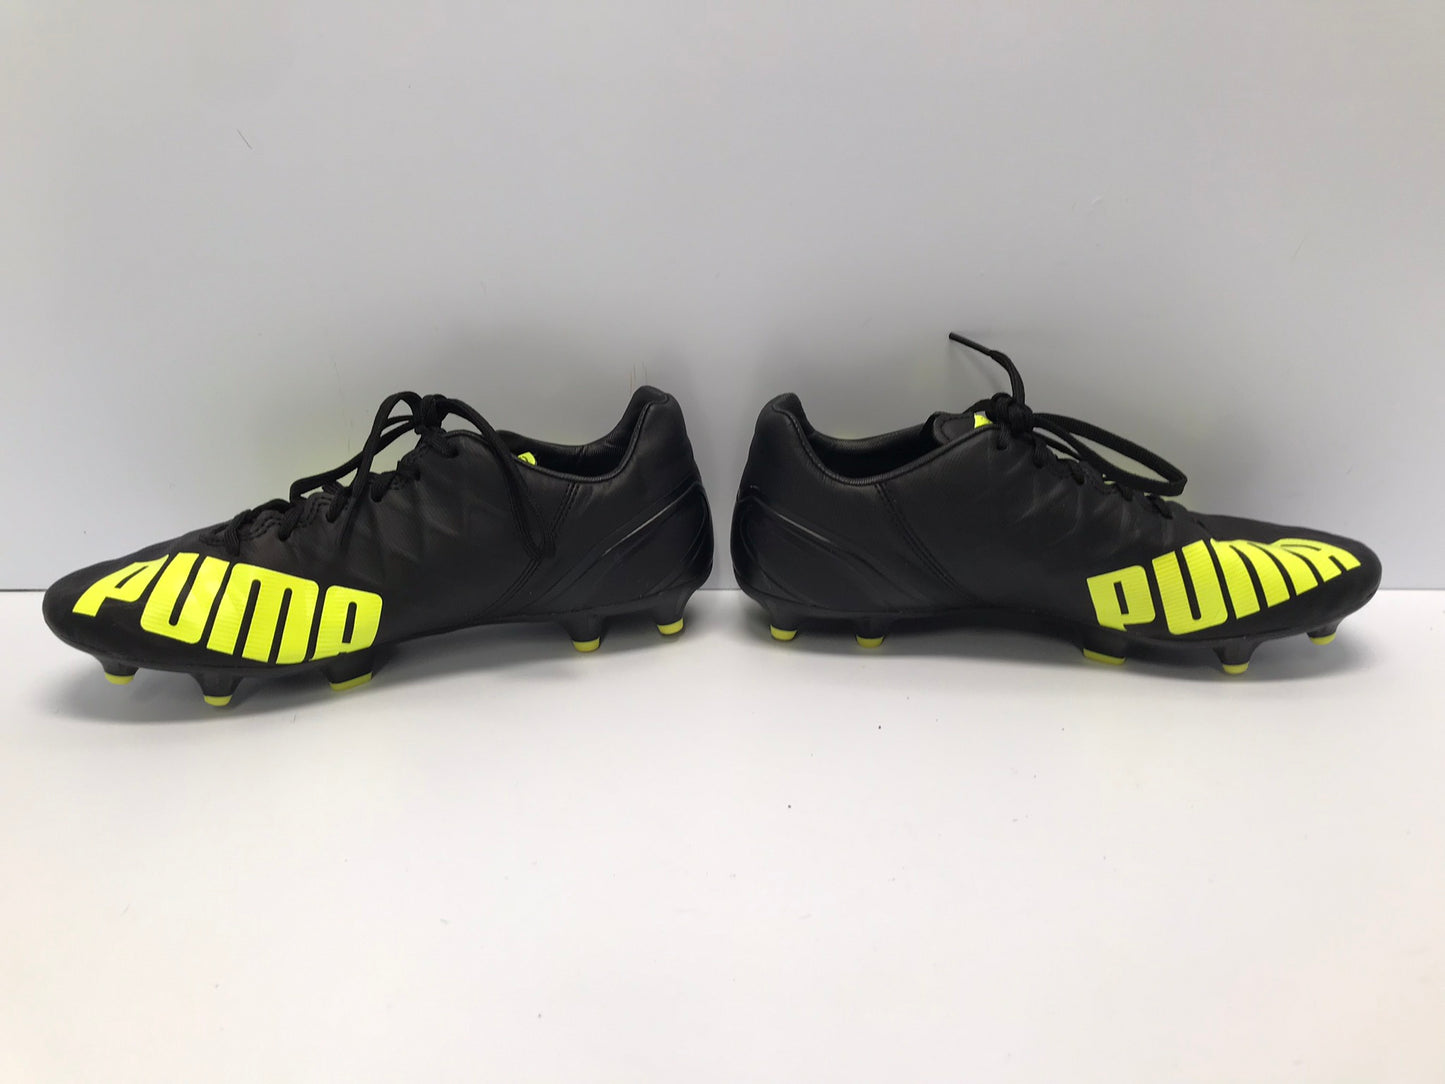 Soccer Shoes Cleats Men's Size 8 Puma Evo Speed 4 Black Lime New Demo Model